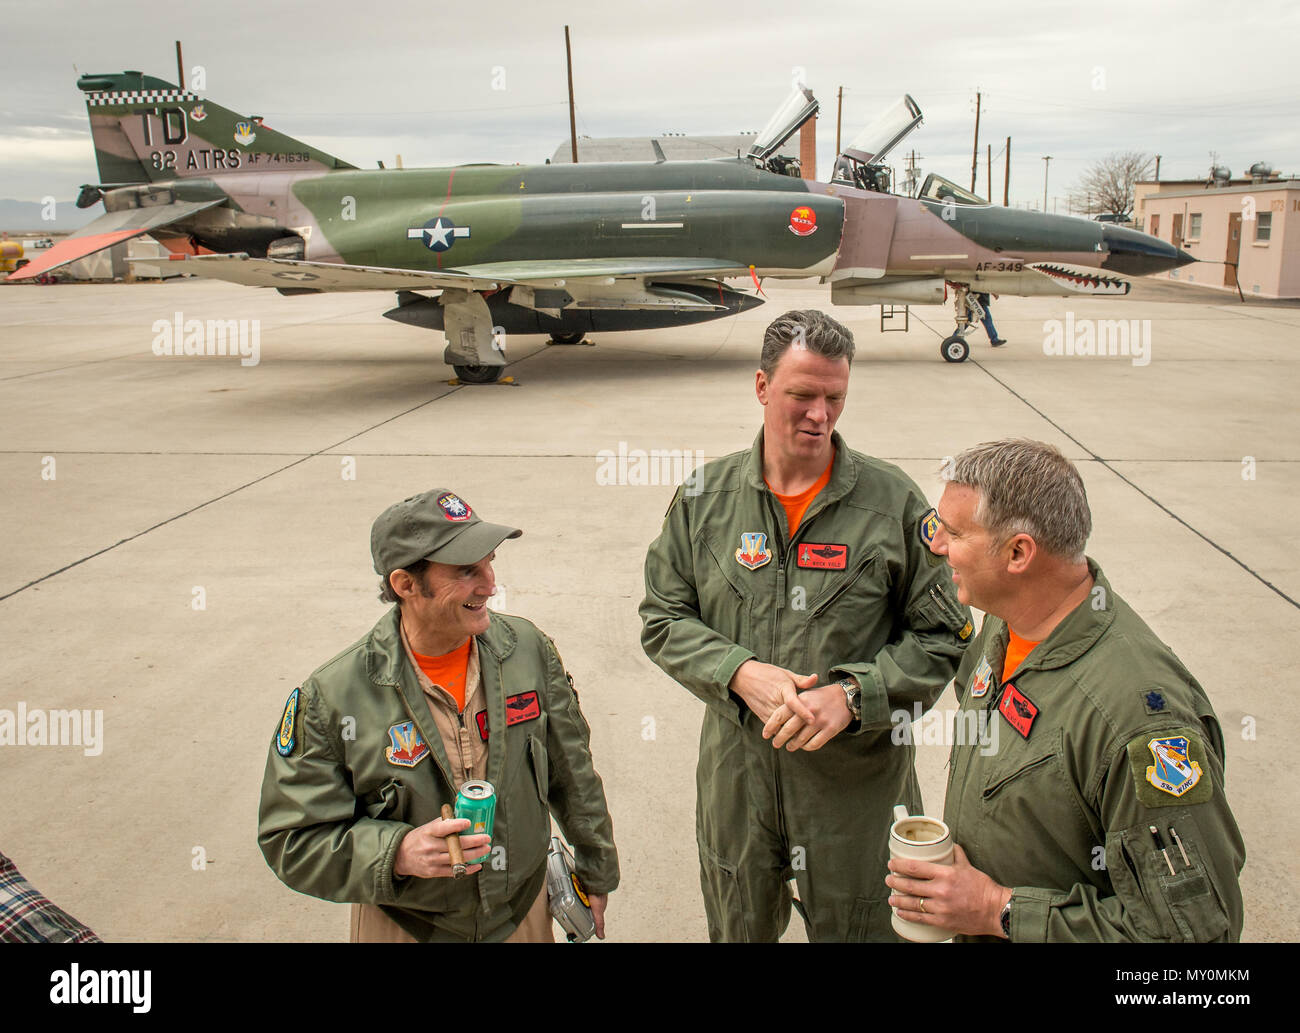 The last active-duty Air Force pilot to fly the McDonnell Douglas F-4 Phantom II, Lt. Col. Ron 'Elvis' King, right, commander of the 82nd Aerial Target Squadron Detachment 1 talks with former QF-4 pilot Eric 'Rock' Vold and Civilian QF-4E Pilot/Controller Lt. Col. (Ret) Jim “WAM” Harkins, after they piloted the final military flight of the storied aircraft at Holloman AFB, N.M., Dec. 21, 2016. The F-4 Phantom II entered the U.S. Air Force inventory in 1963 and was the primary multi-role aircraft in the USAF throughout the 1960s and 1970s. The F-4 flew bombing, combat air patrol, fighter escort Stock Photo